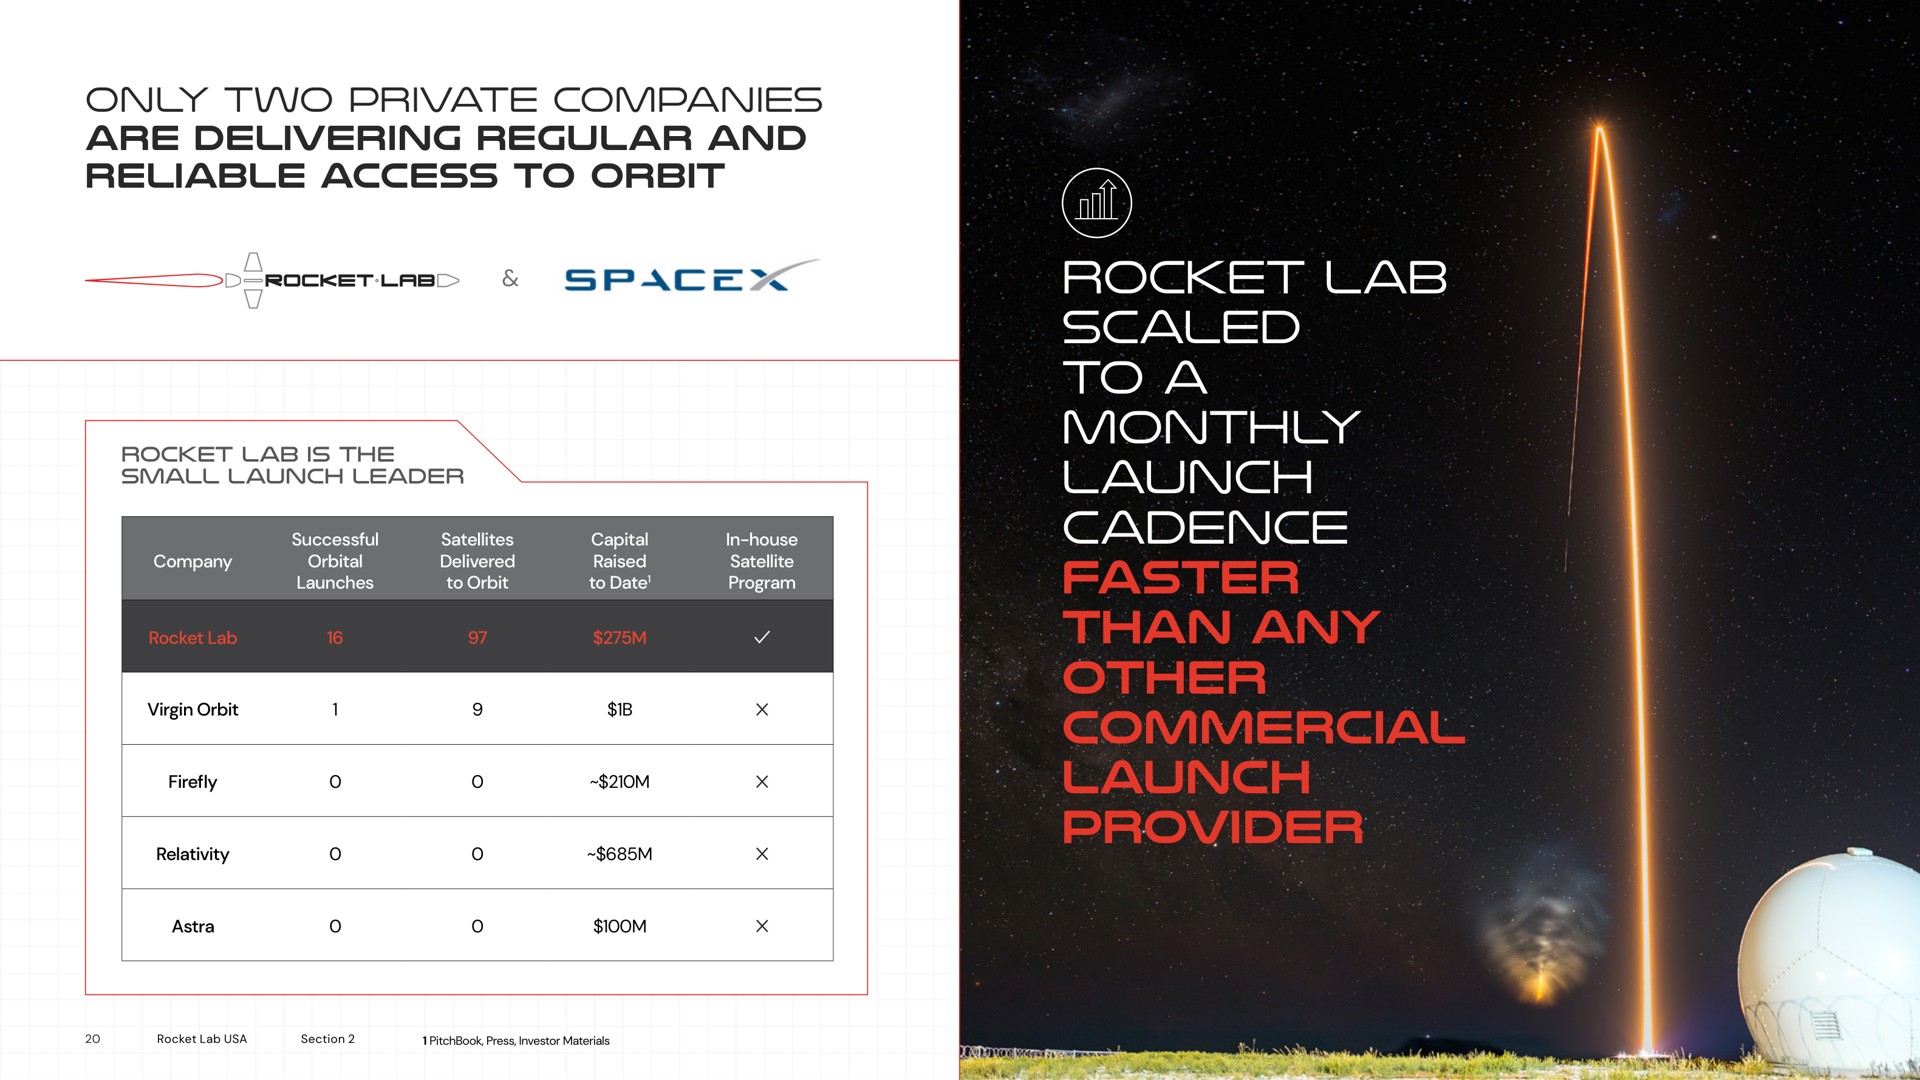 rocket lab scaled to a monthly launch cadence faster than any other commercial launch provider toa | Rocket Lab